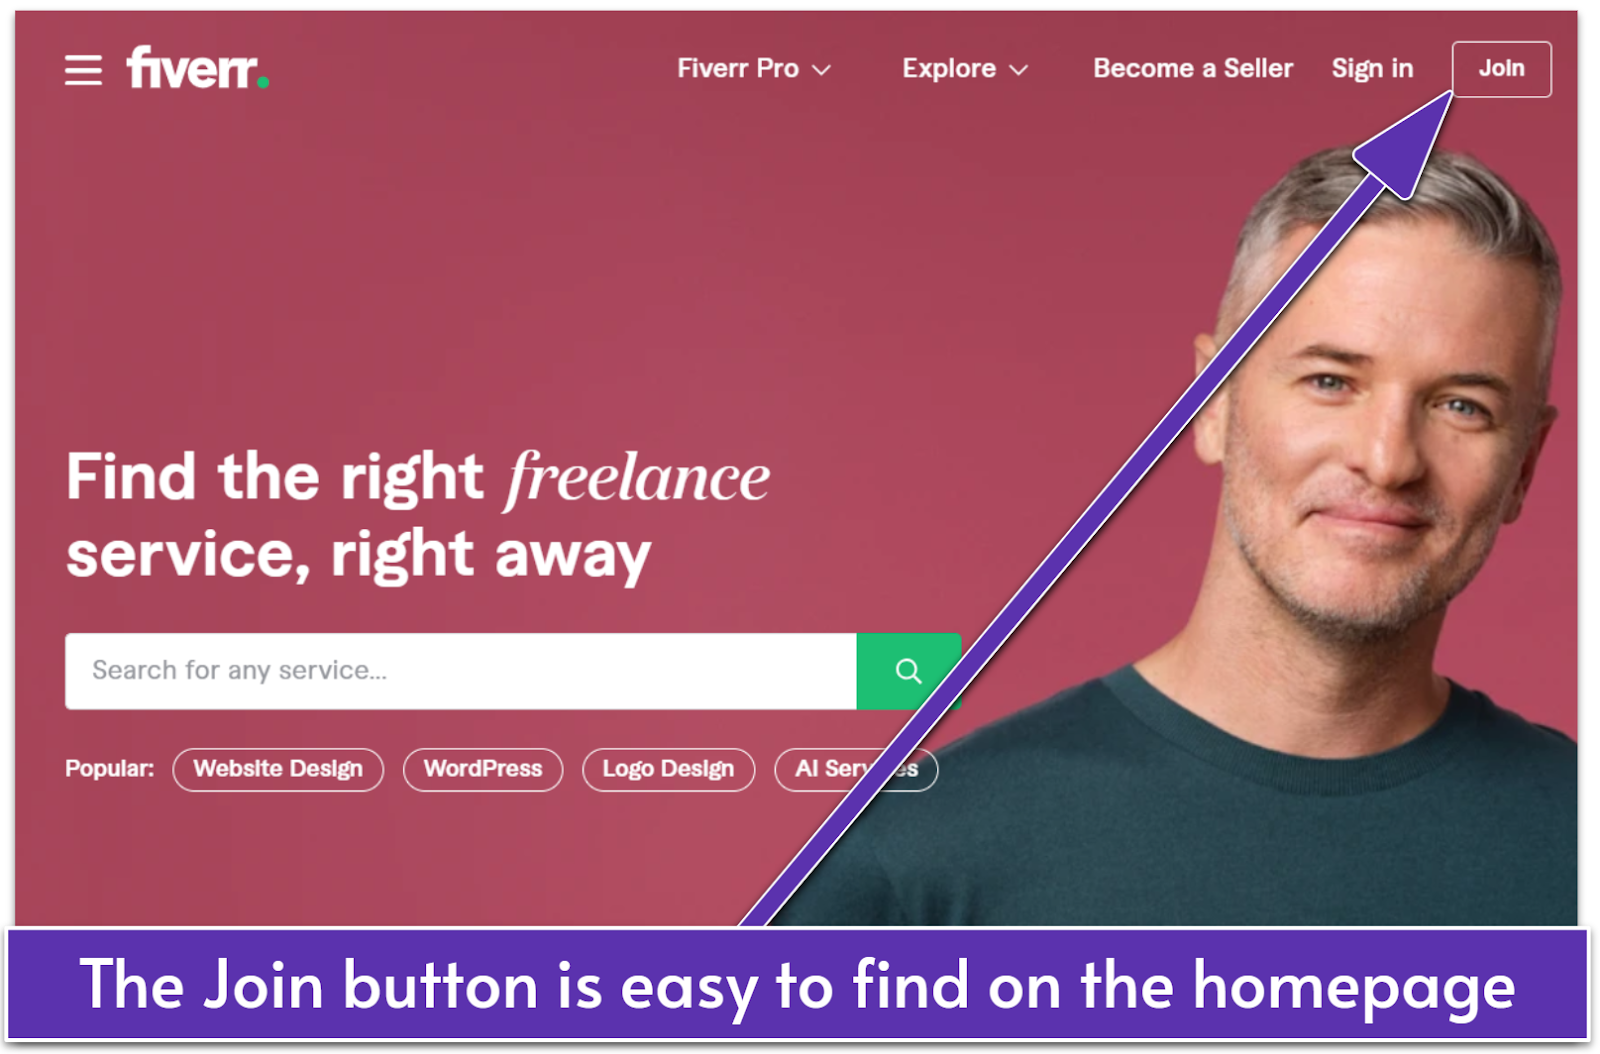 The location of the Join button on Fiverr's homepage